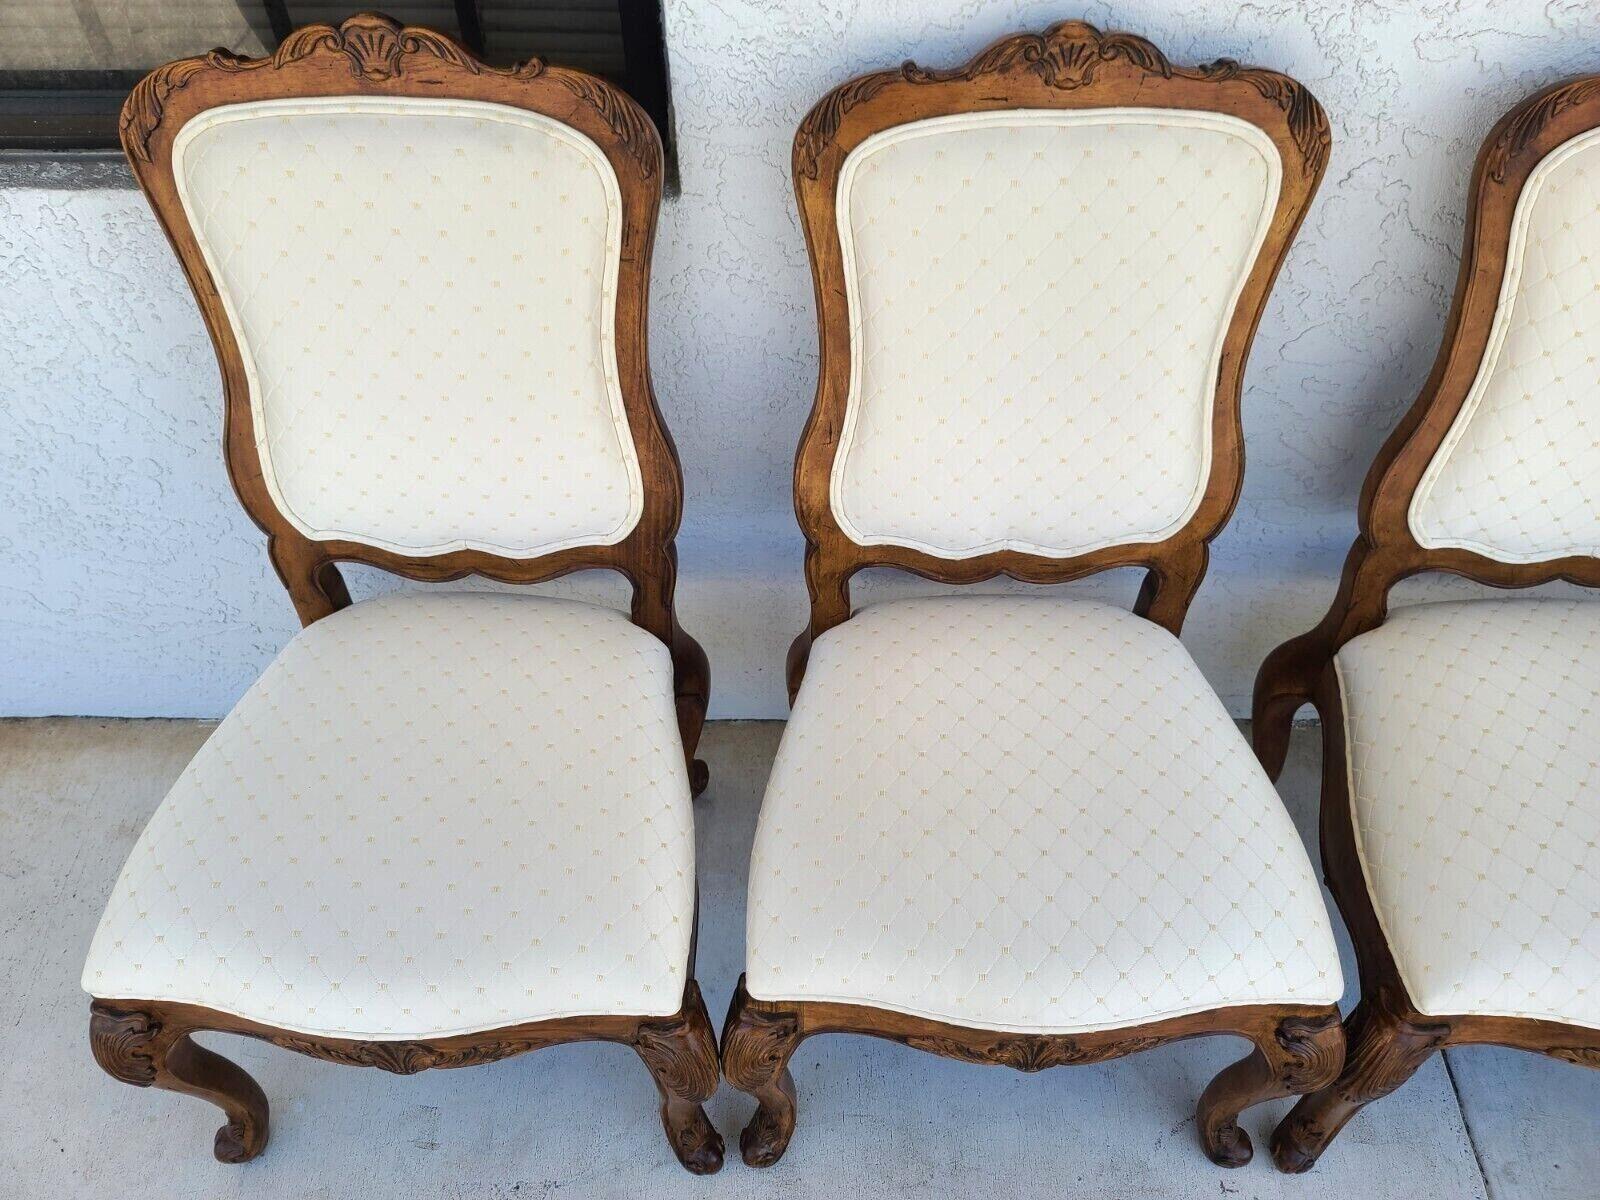 French Provincial Italian Alfresco Style Dining Chairs by CENTURY FURNITURE - Set of 4 For Sale